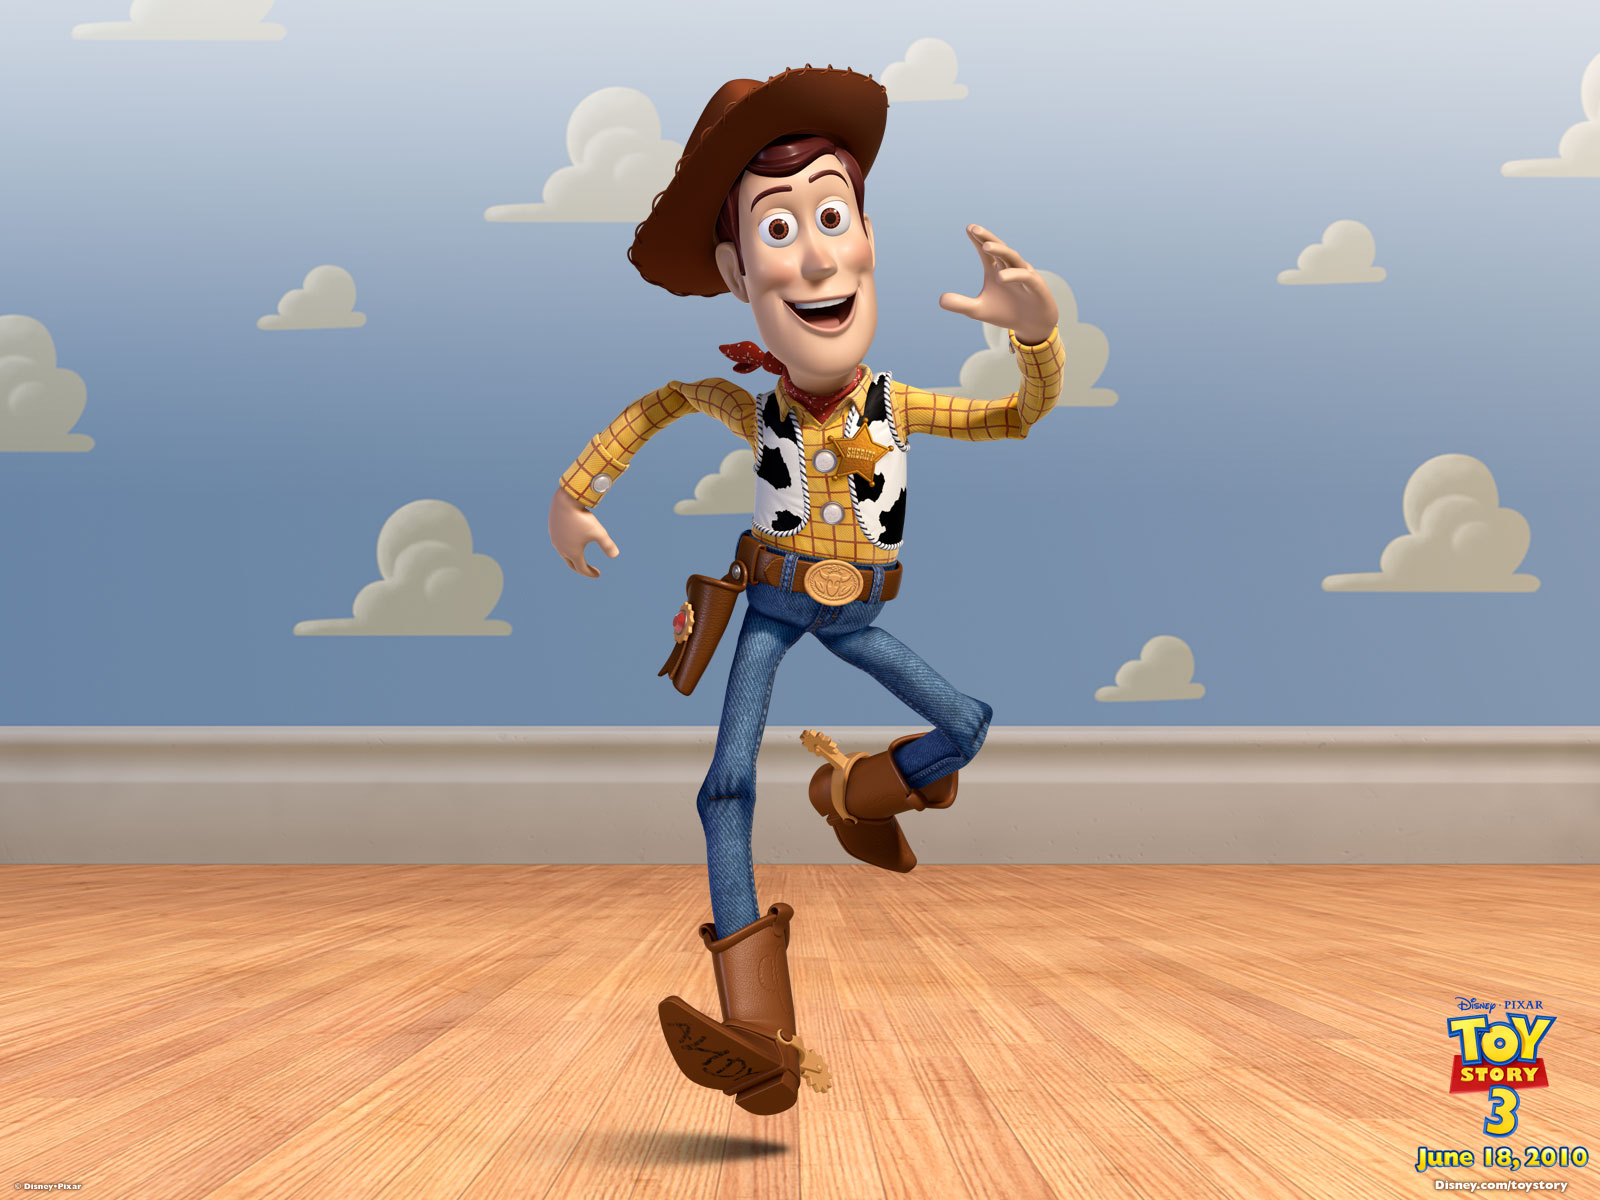  Toy Story wallpaper   Click picture for high resolution HD wallpaper